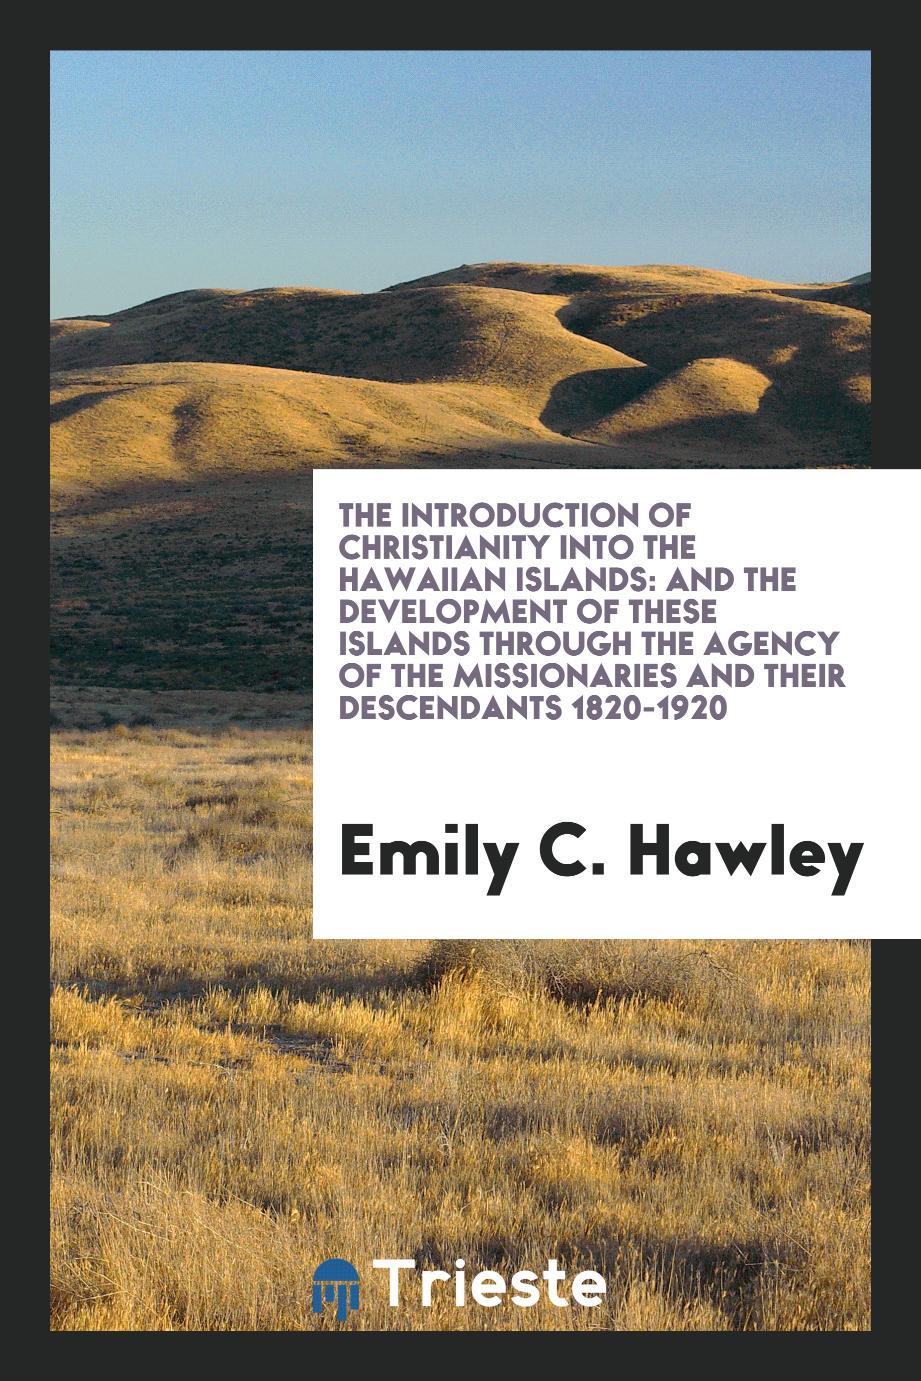 The Introduction of Christianity Into the Hawaiian Islands: And the Development of These Islands through the agency of the missionaries and their descendants 1820-1920